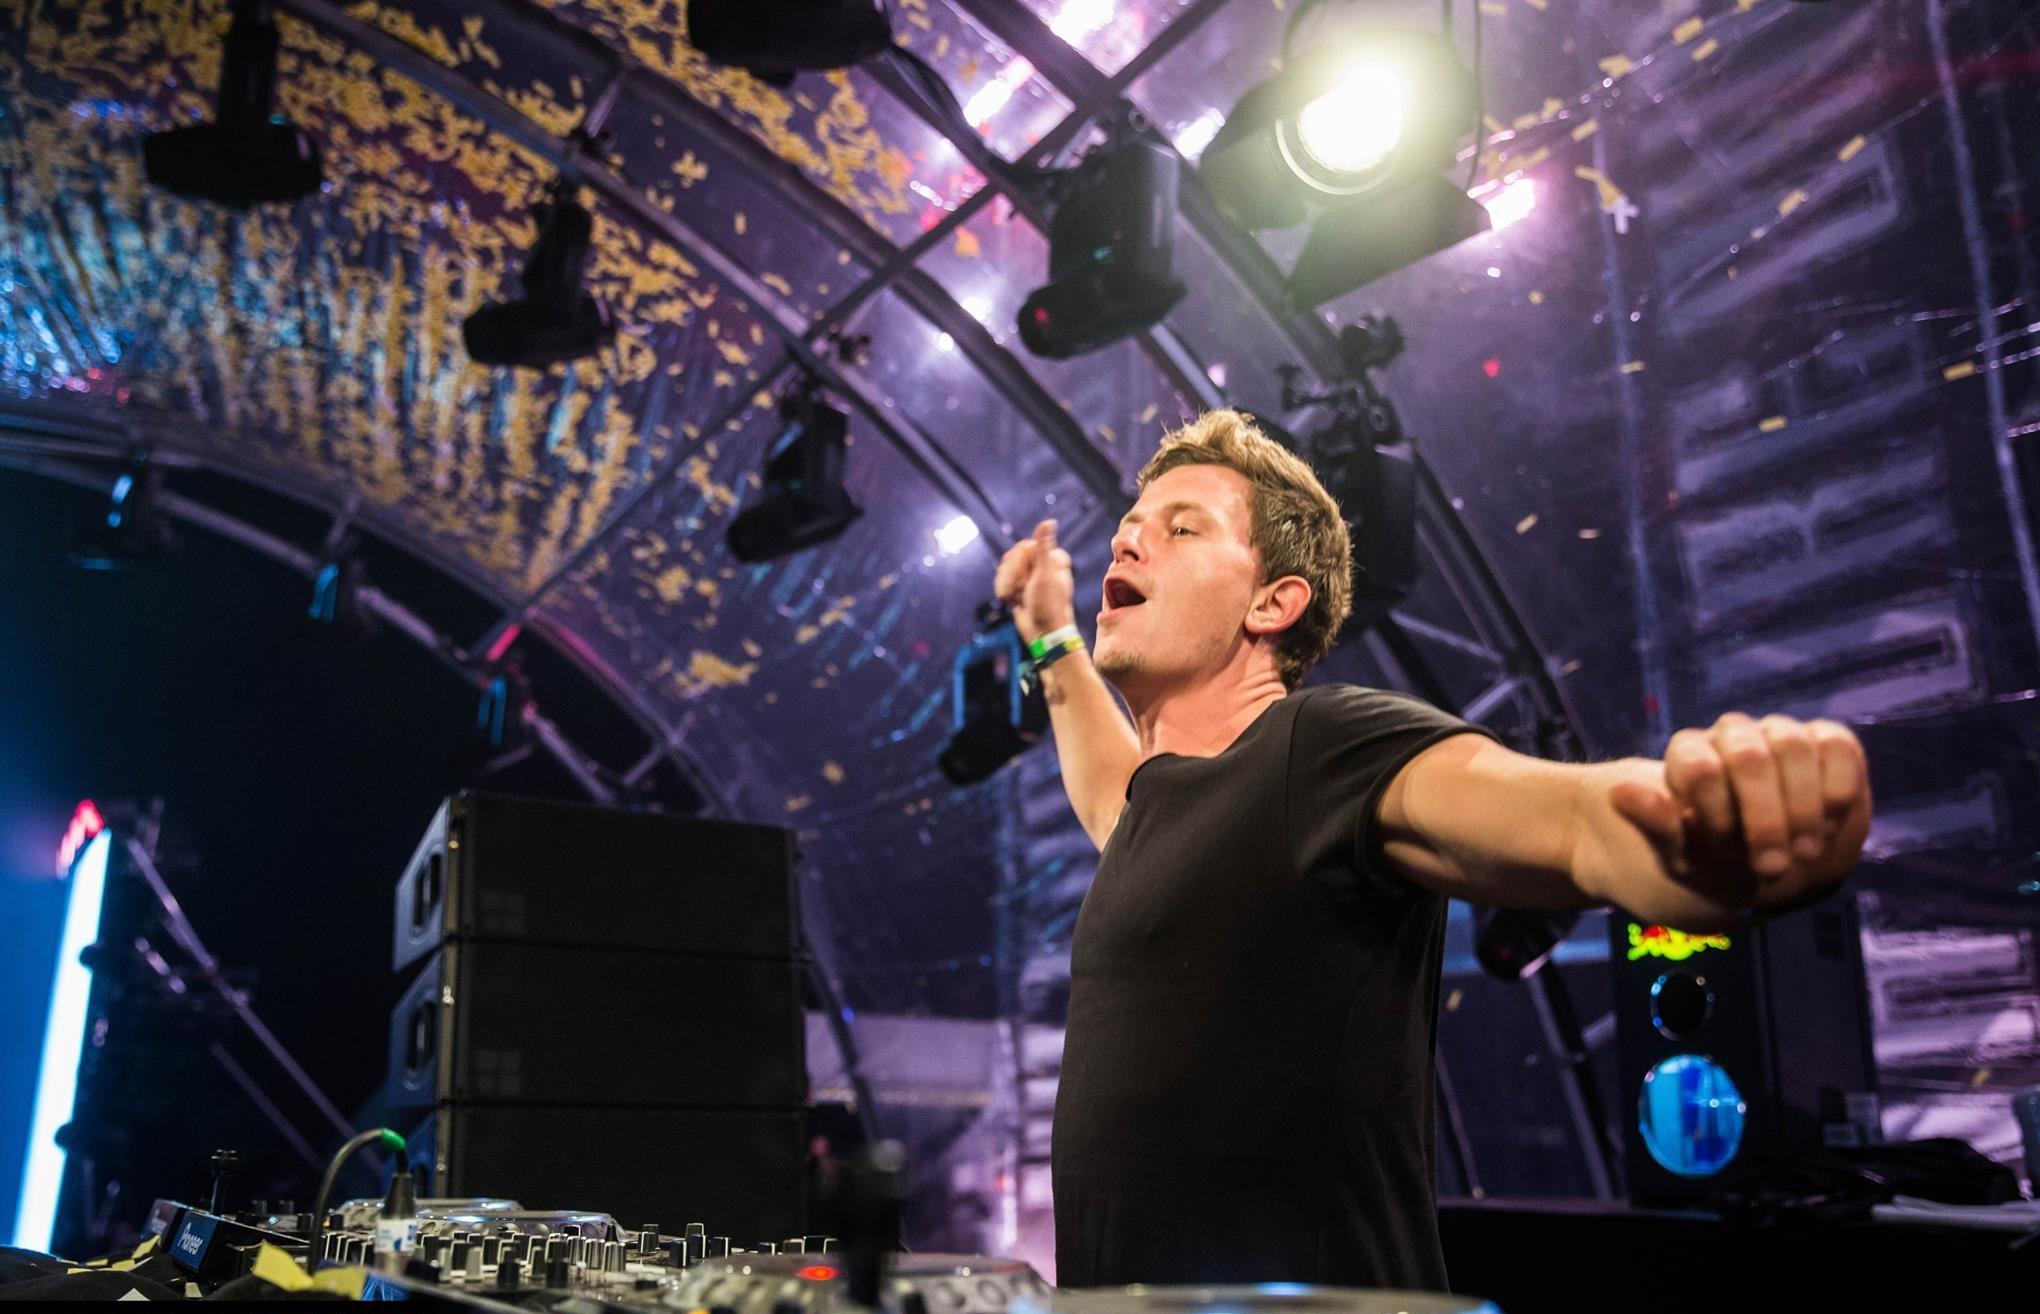 Fedde le Grand Wallpaper Image Photo Picture Background